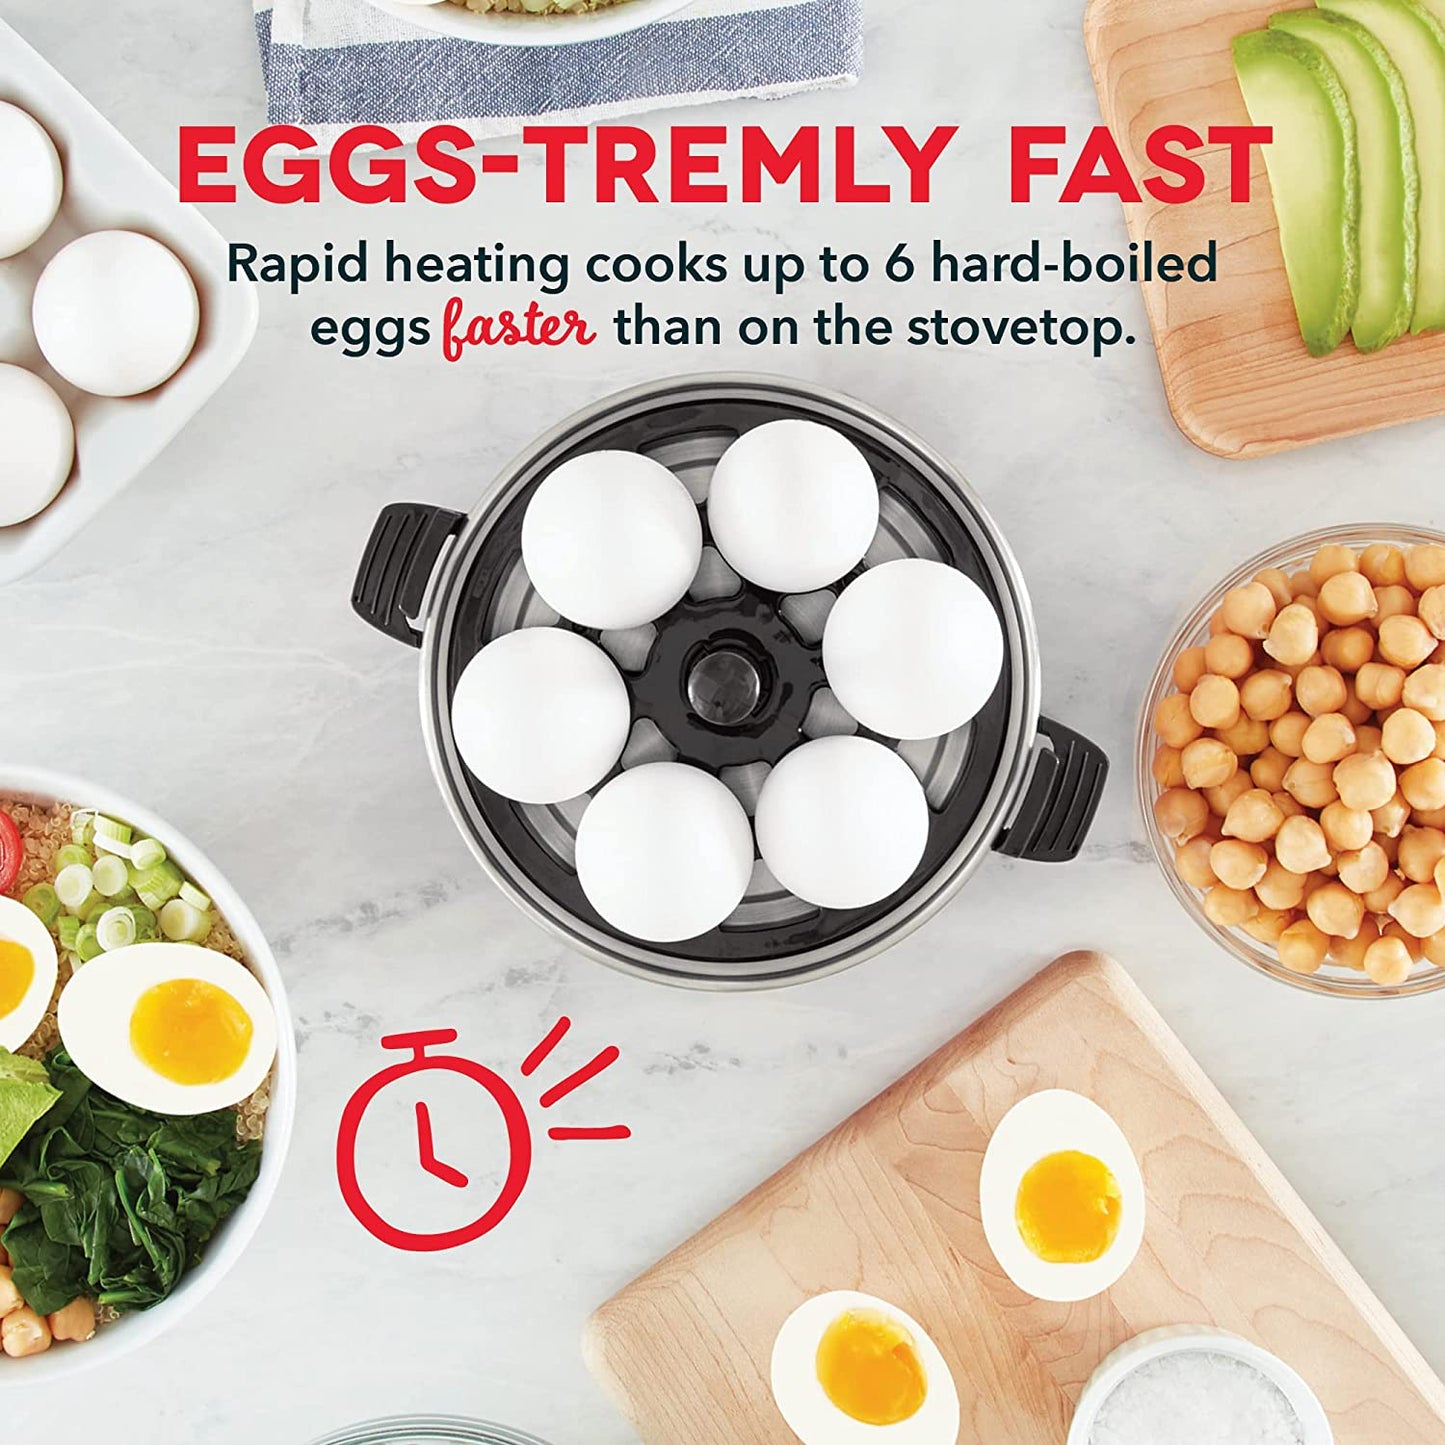 Rapid Egg Cooker: 6 Egg Capacity Electric Egg Cooker for Hard Boiled Eggs, Poached Eggs, Scrambled Eggs, or Omelets with Auto Shut off Feature - Black